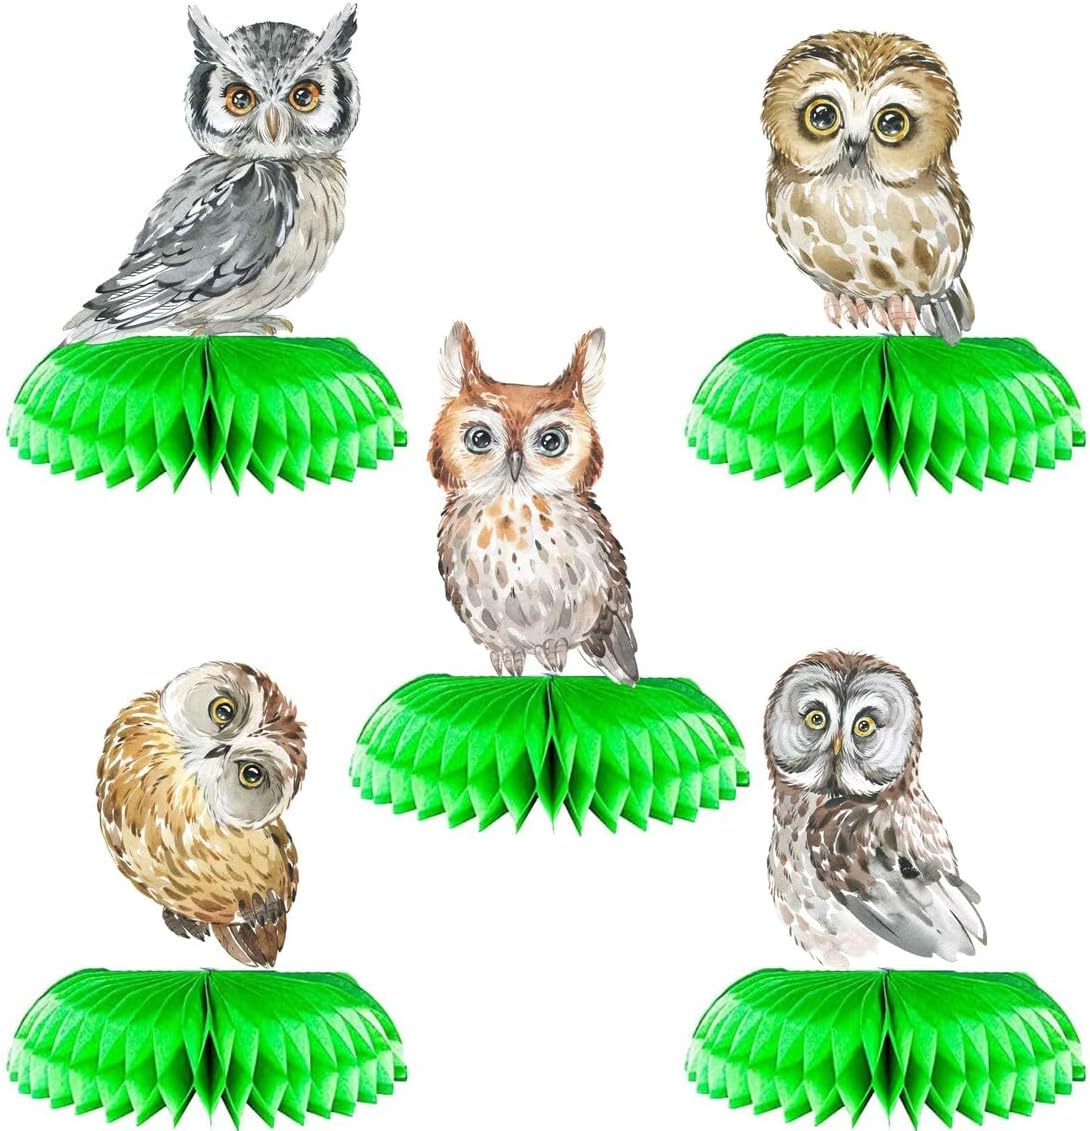 Enchanting Owl Table Centerpieces Honeycombs Set of 5 – Woodland Elegance for Your Events